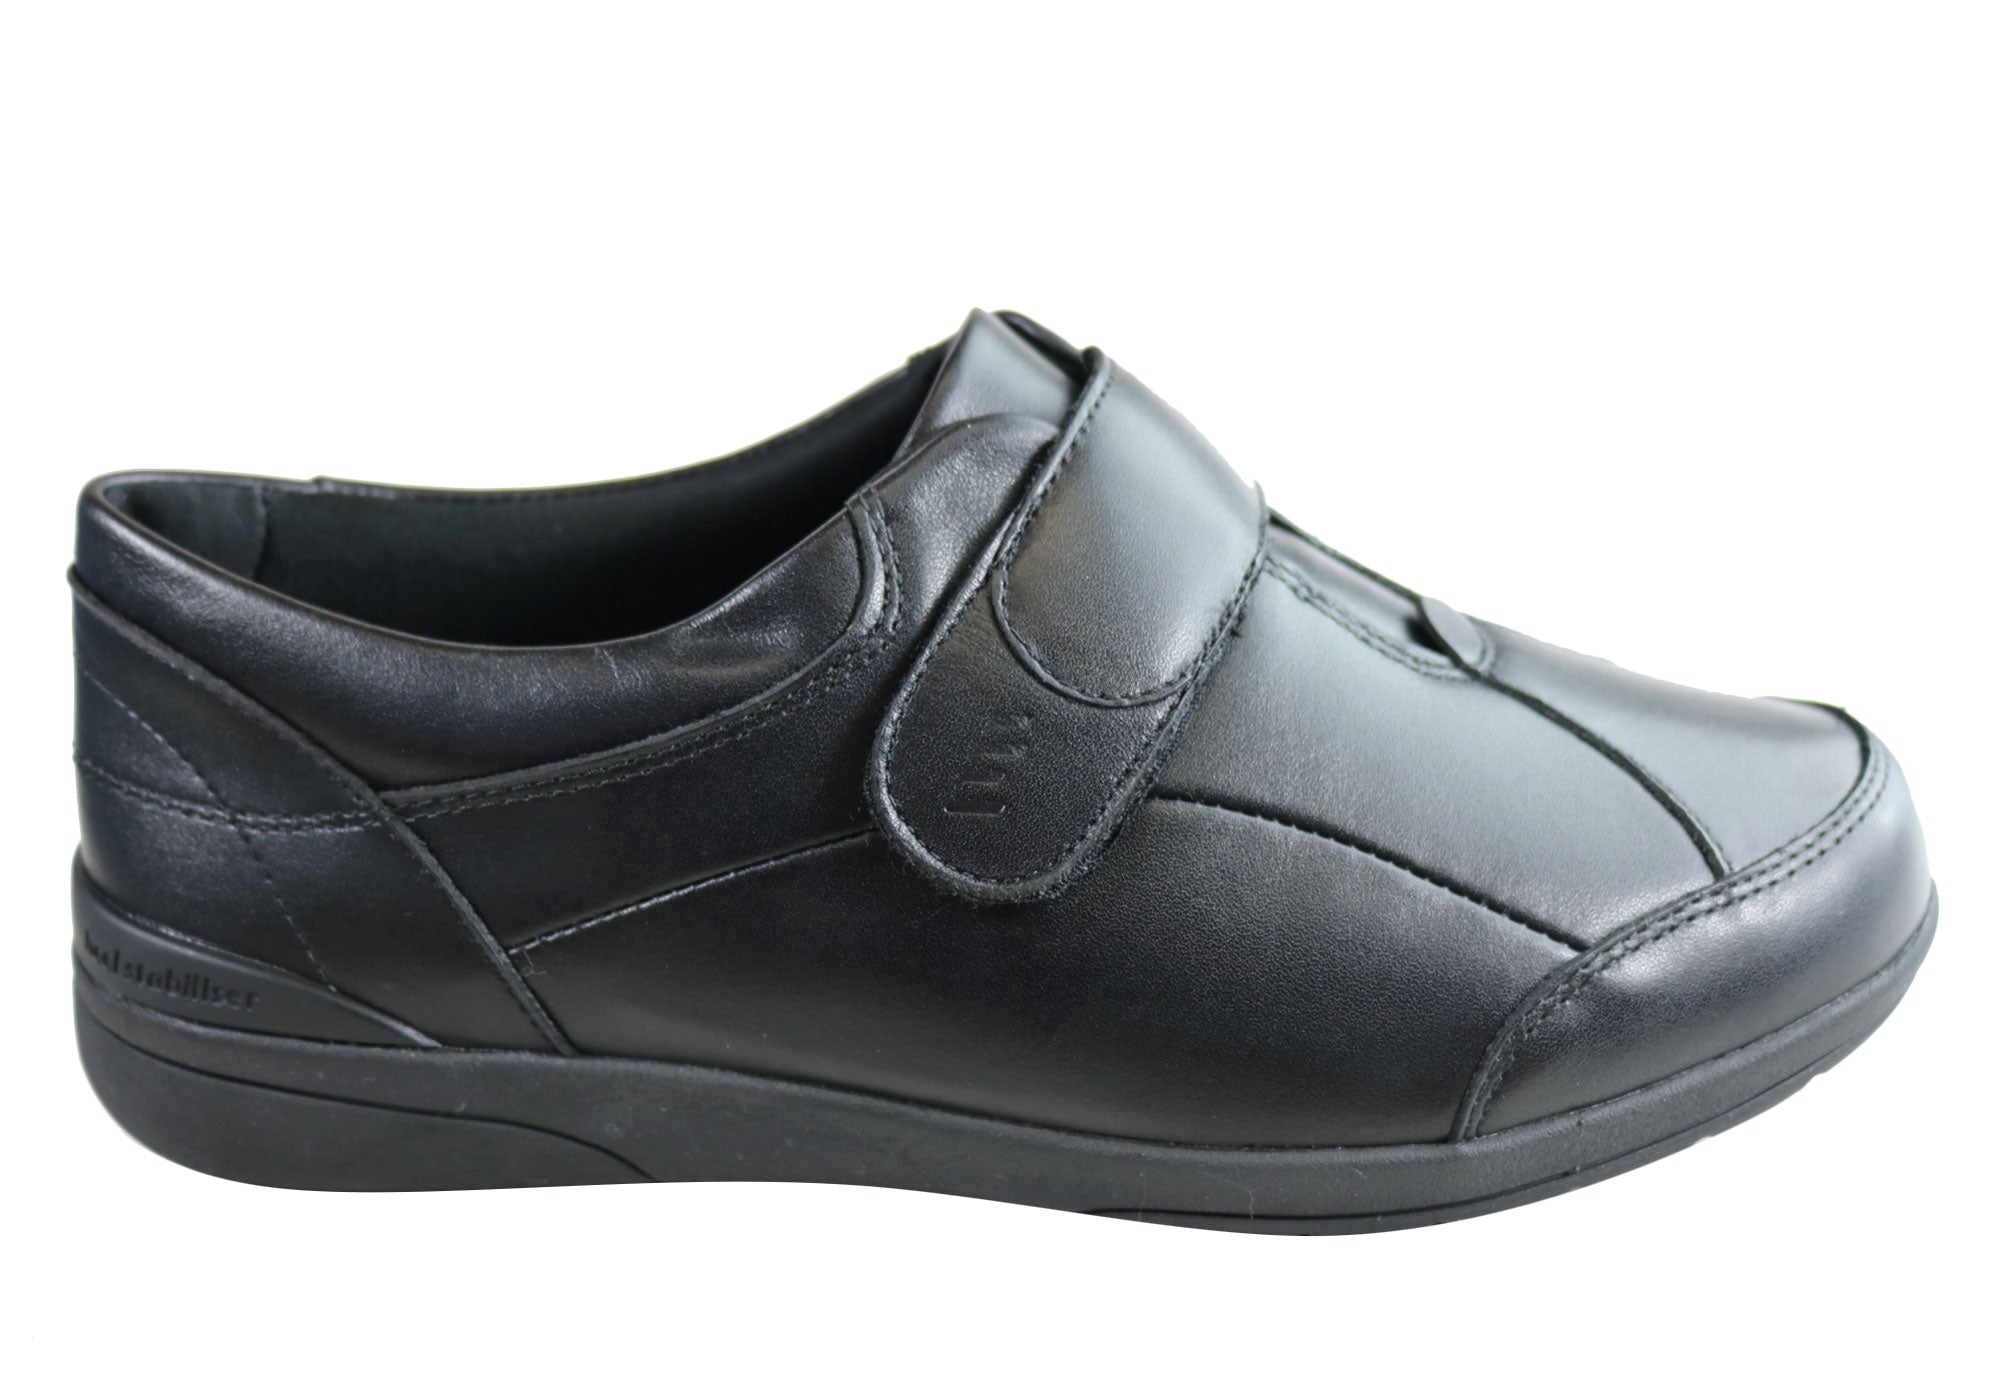 wide fit extra comfort shoes